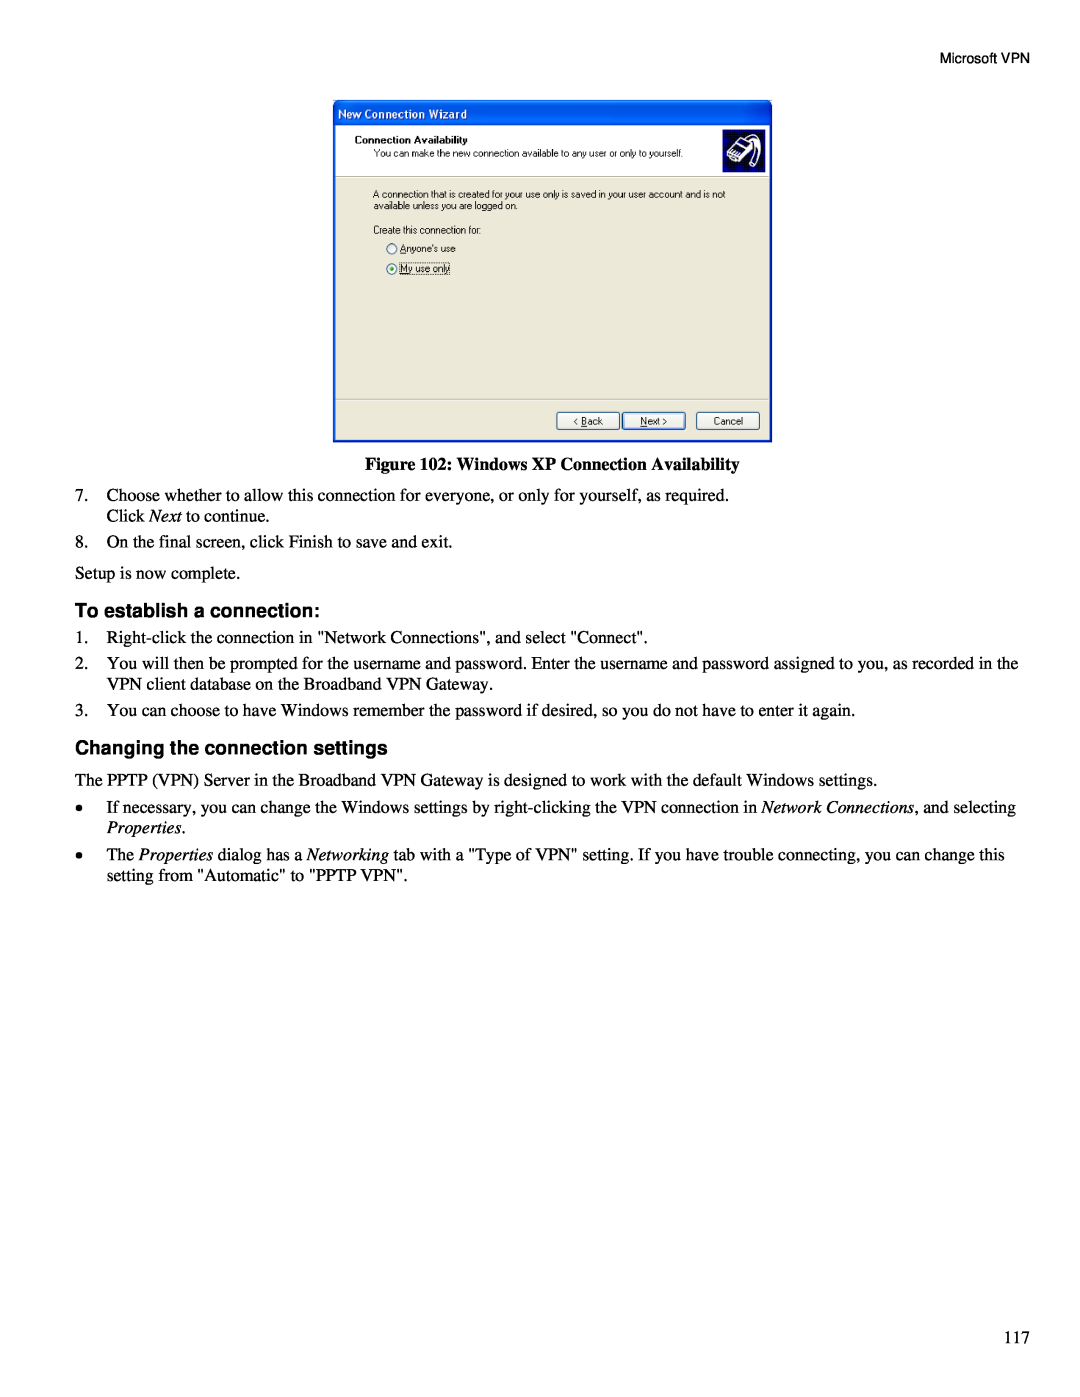 TRENDnet TW100-BRV324 To establish a connection, Changing the connection settings, Windows XP Connection Availability 